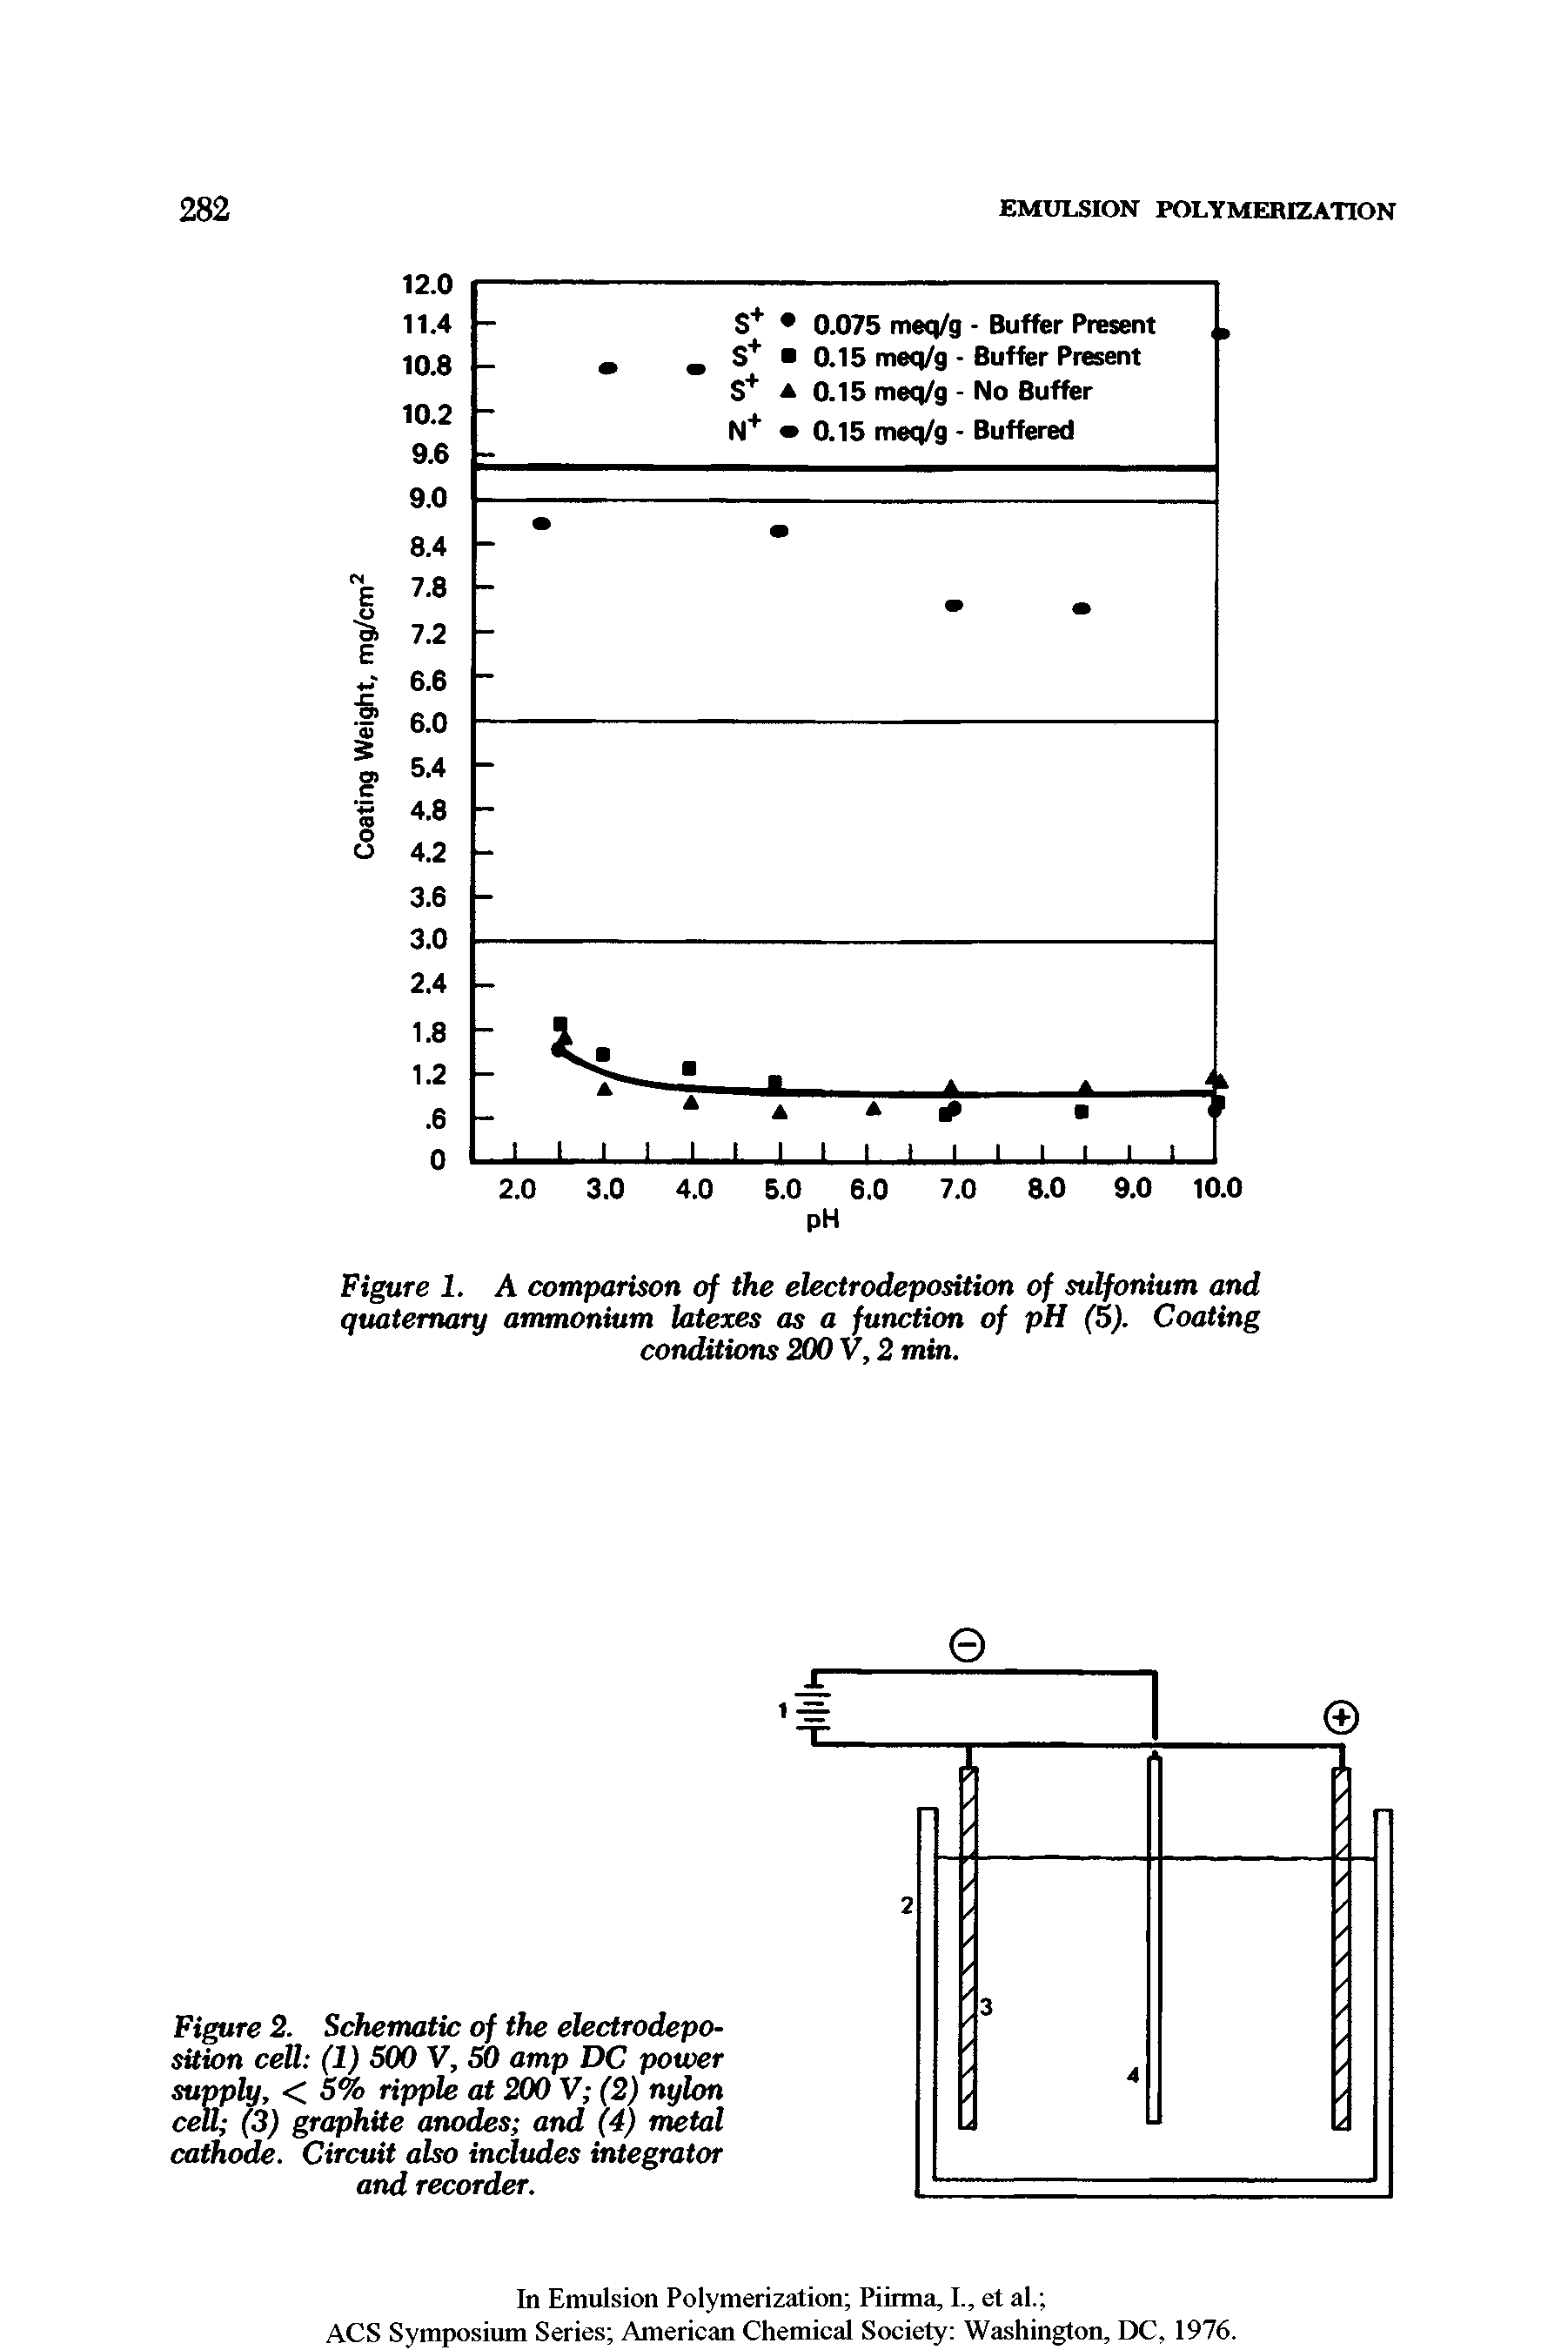 Figure 1. A comparison of the electrodeposition of sulfonium and quaternary ammonium latexes as a function of pH (5). Coating conditions 200 V, 2 min.